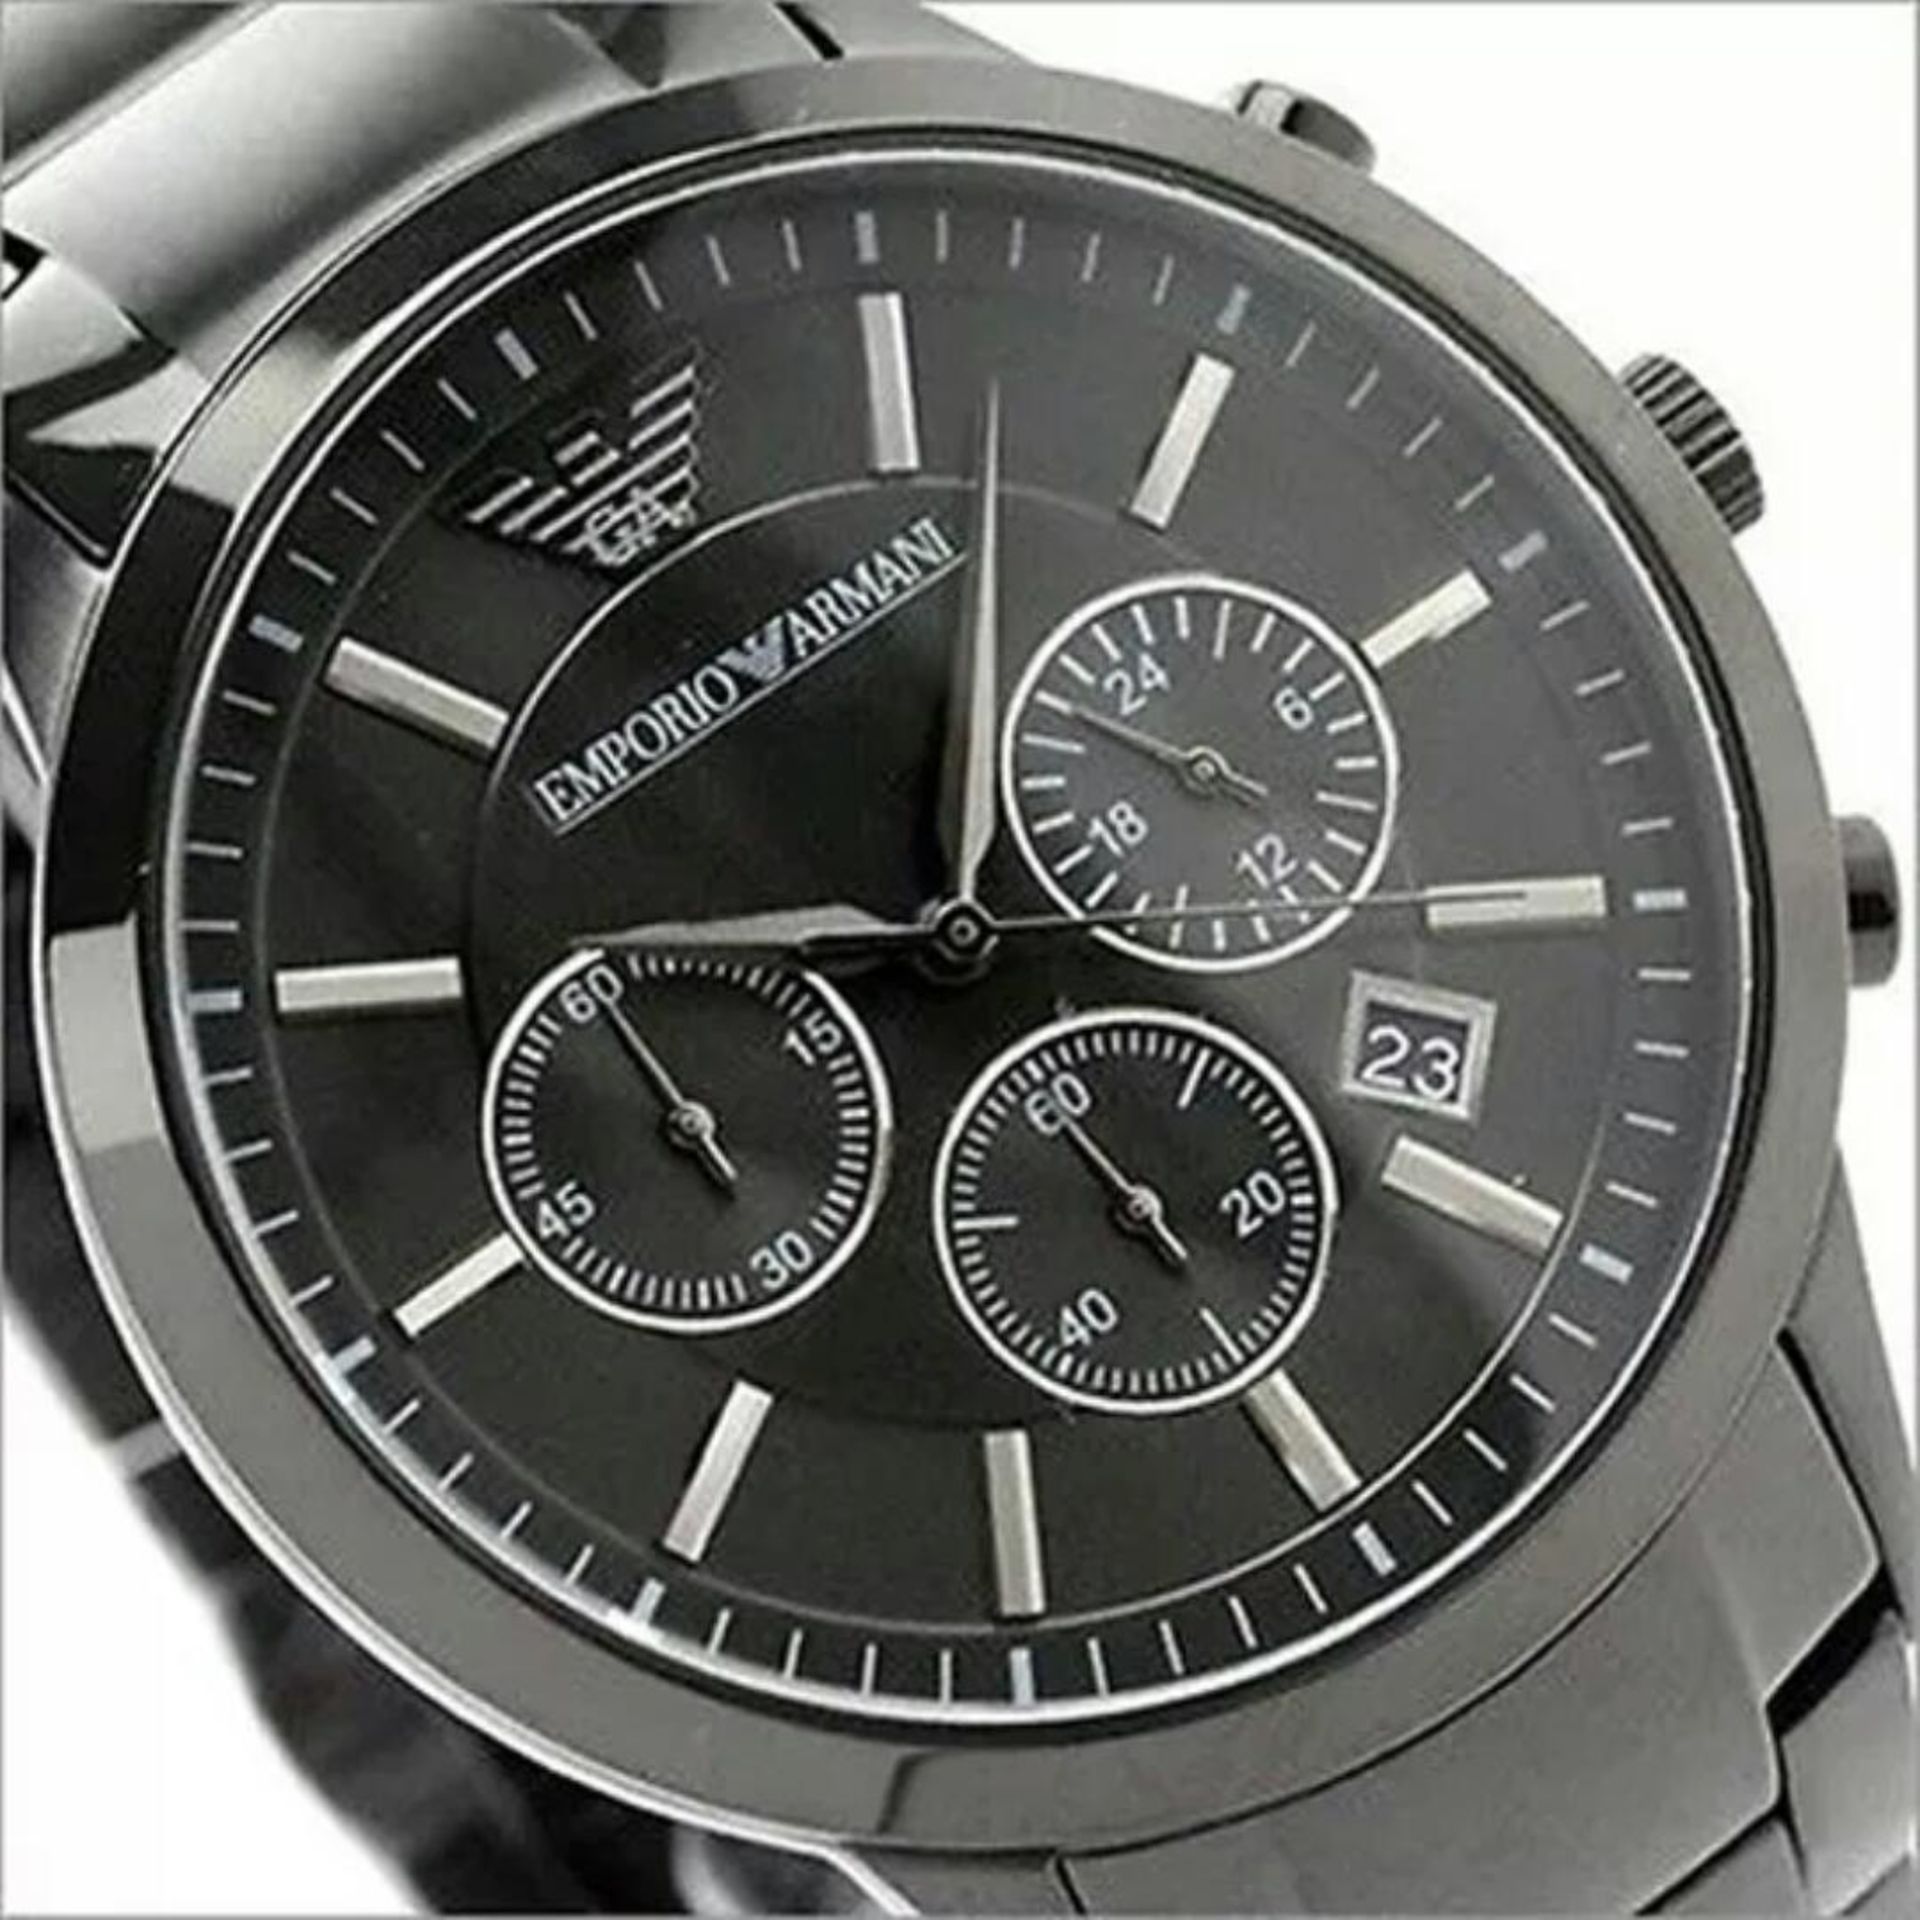 BRAND NEW EMPORIO ARMANI AR2453, GENTS ION PLATED CHRONOGRAPH WATCH, WITH A BLACK CIRCULAR DIAL - - Image 2 of 2